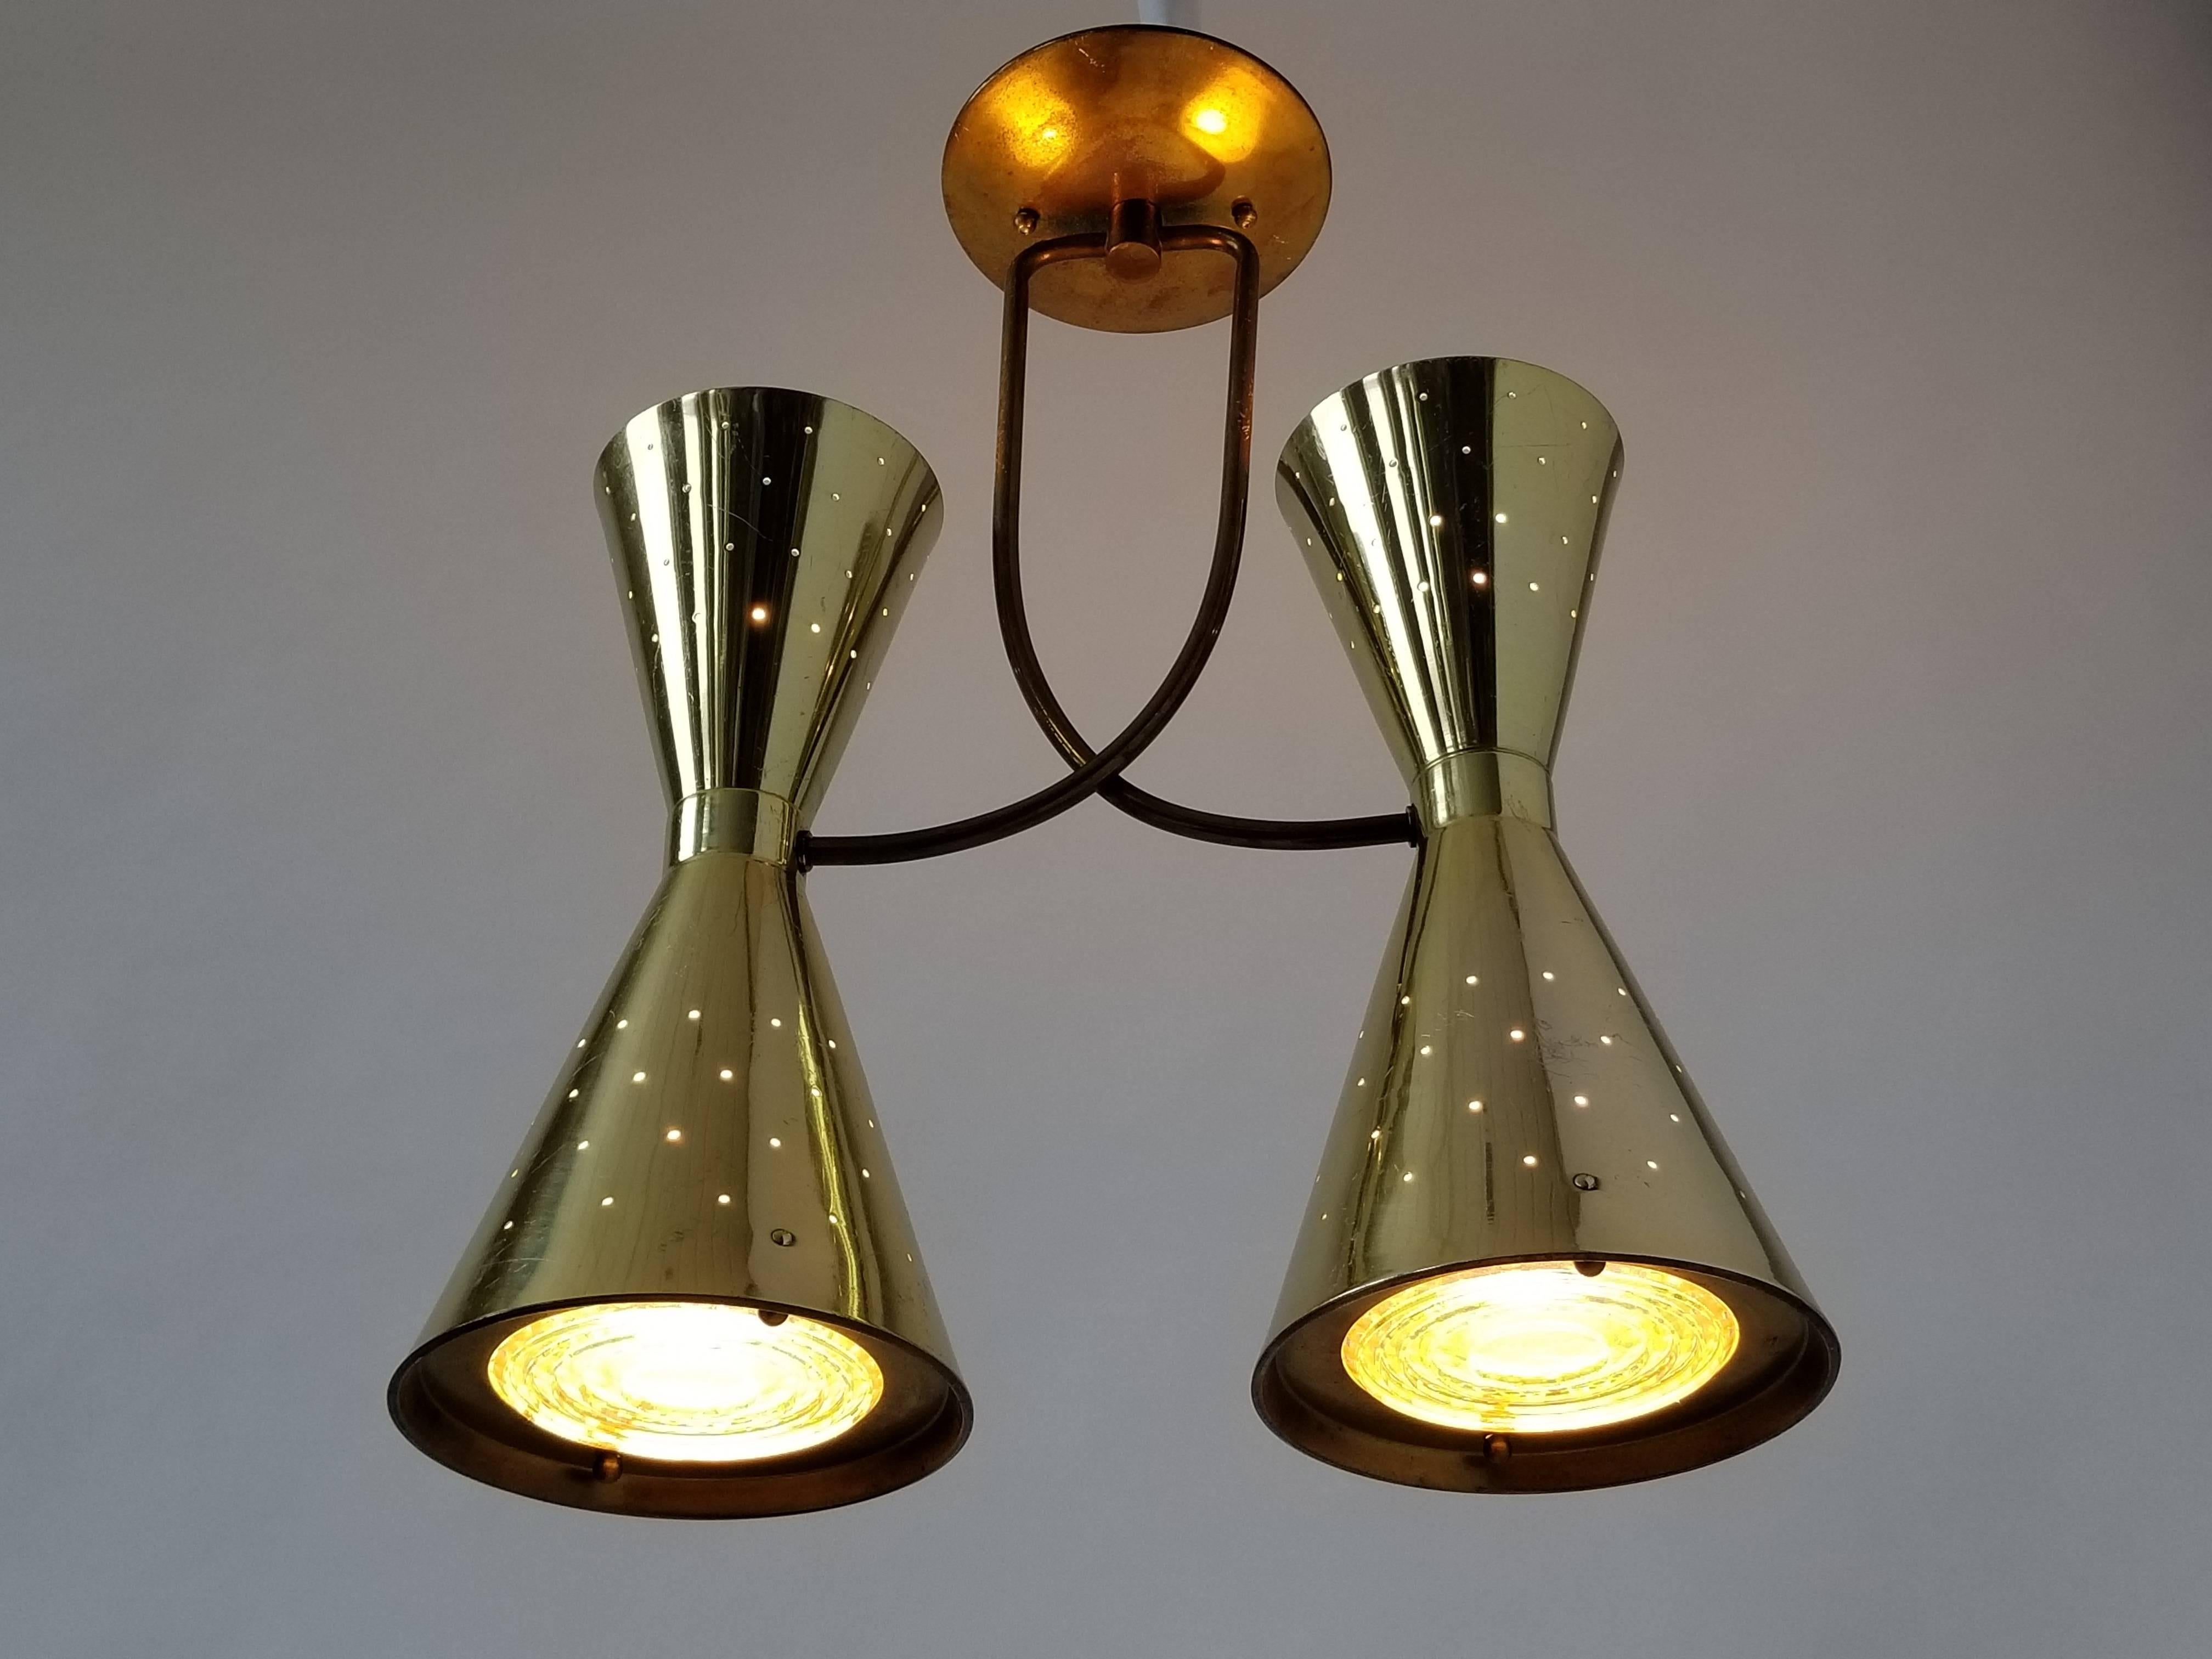 Each gently pierced brass plated shade are 14 inches high by 6.75 inches diameter for the lower portion. Supportive rods is made of brass.

Under each shade, there is glass lens (fresnel) that disperse light evenly . An outer ring held by two